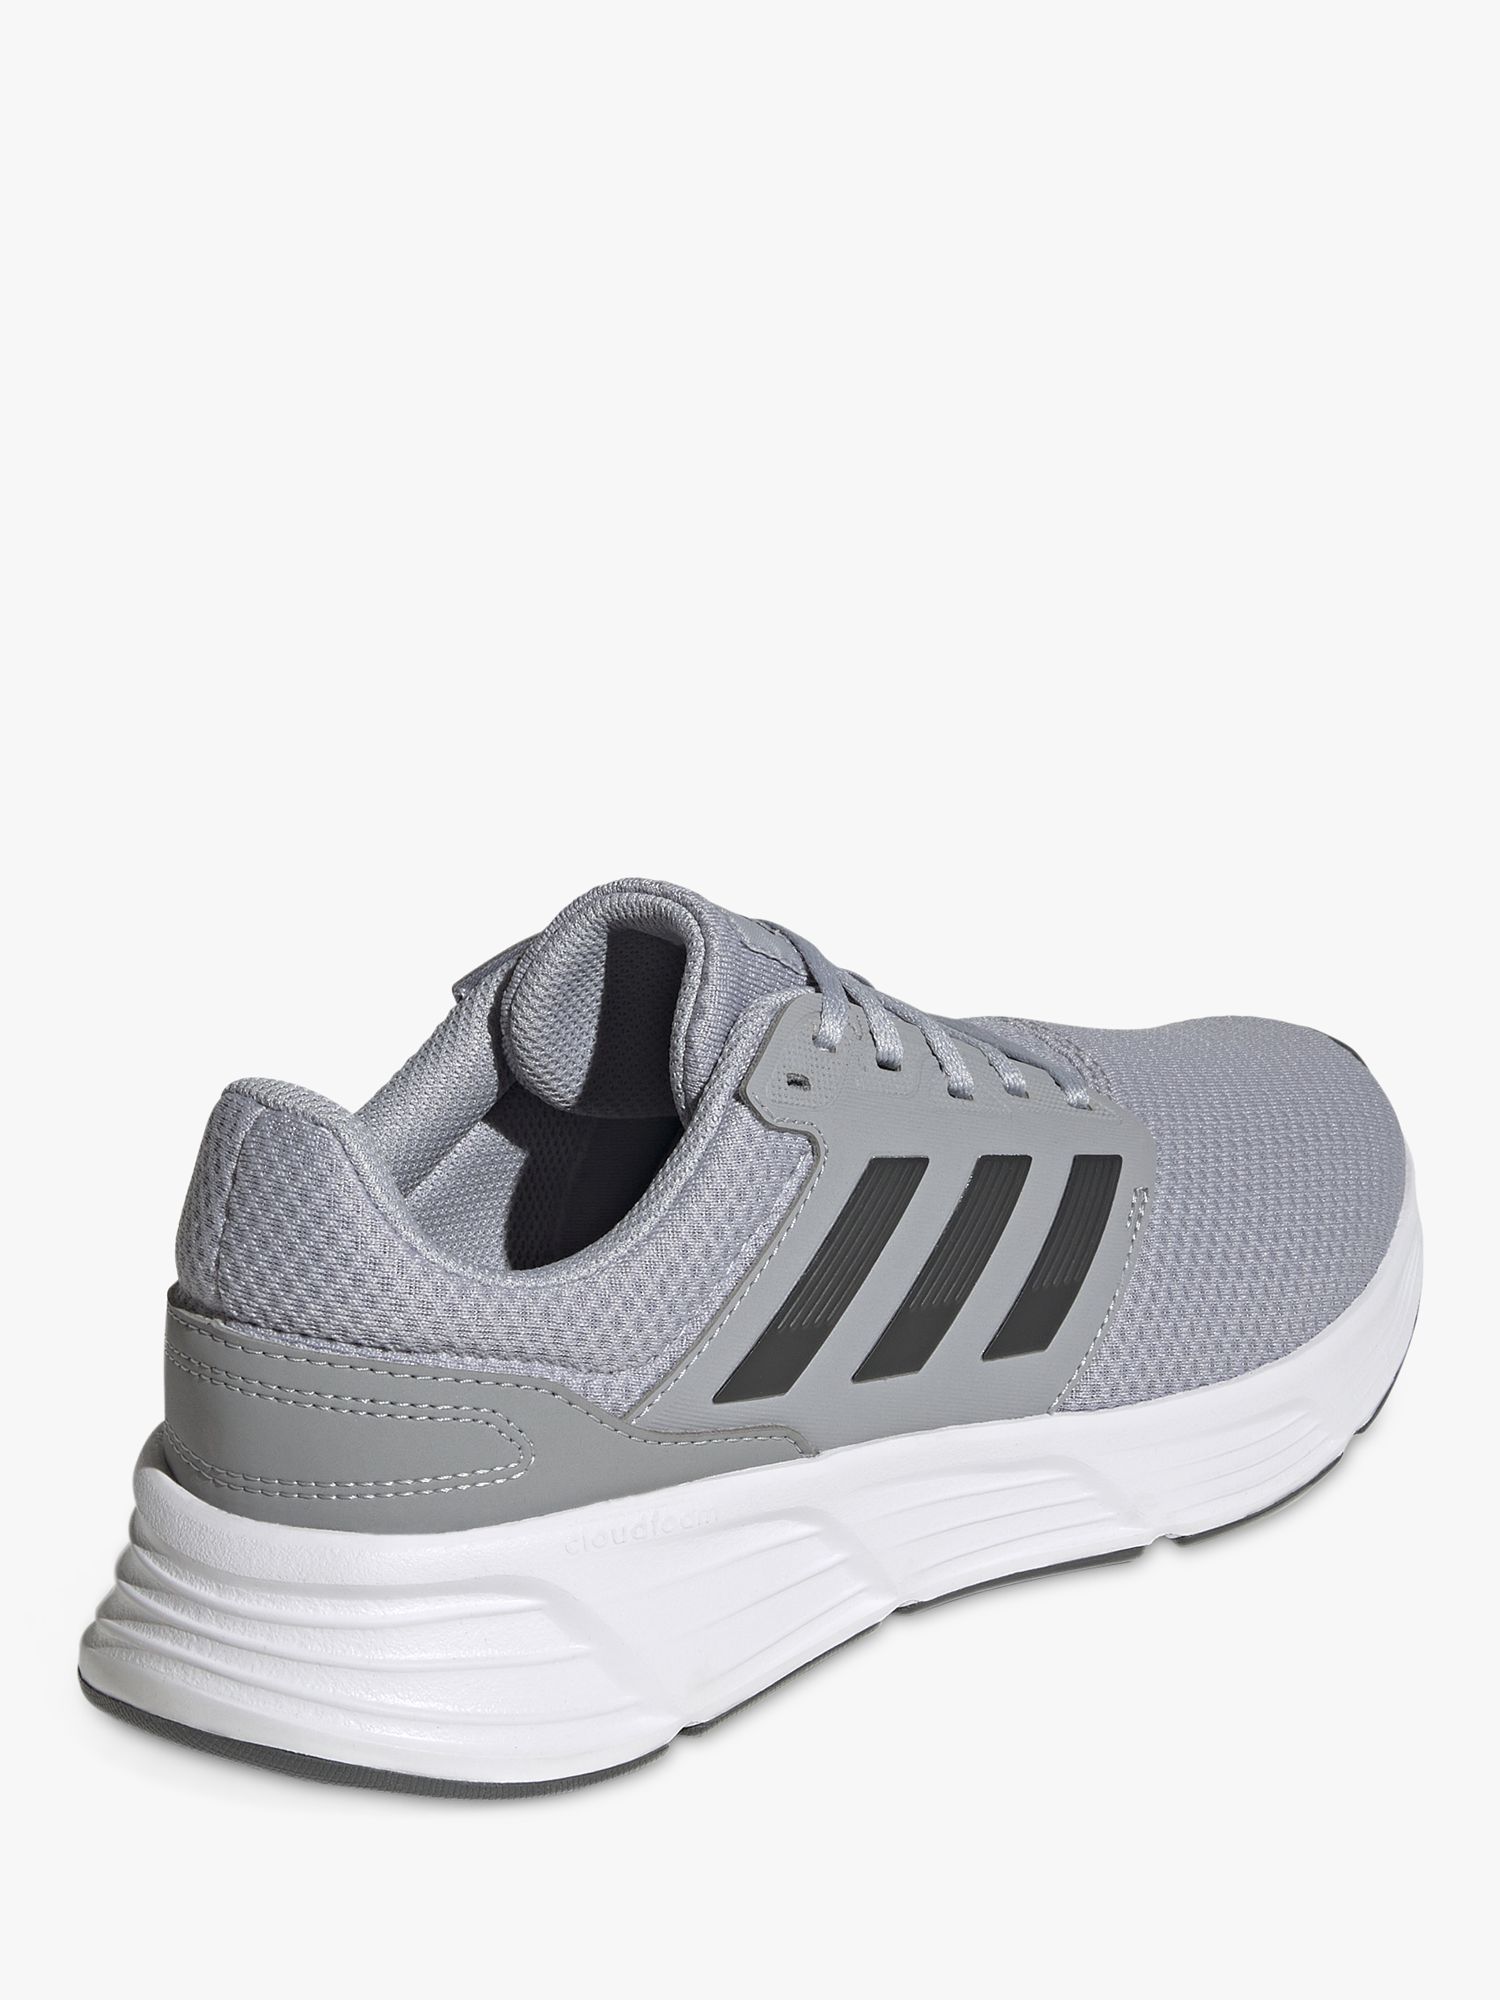 adidas Galaxy 6 Men's Running Shoes, Halo Silver/Carbon/Cloud White, 7